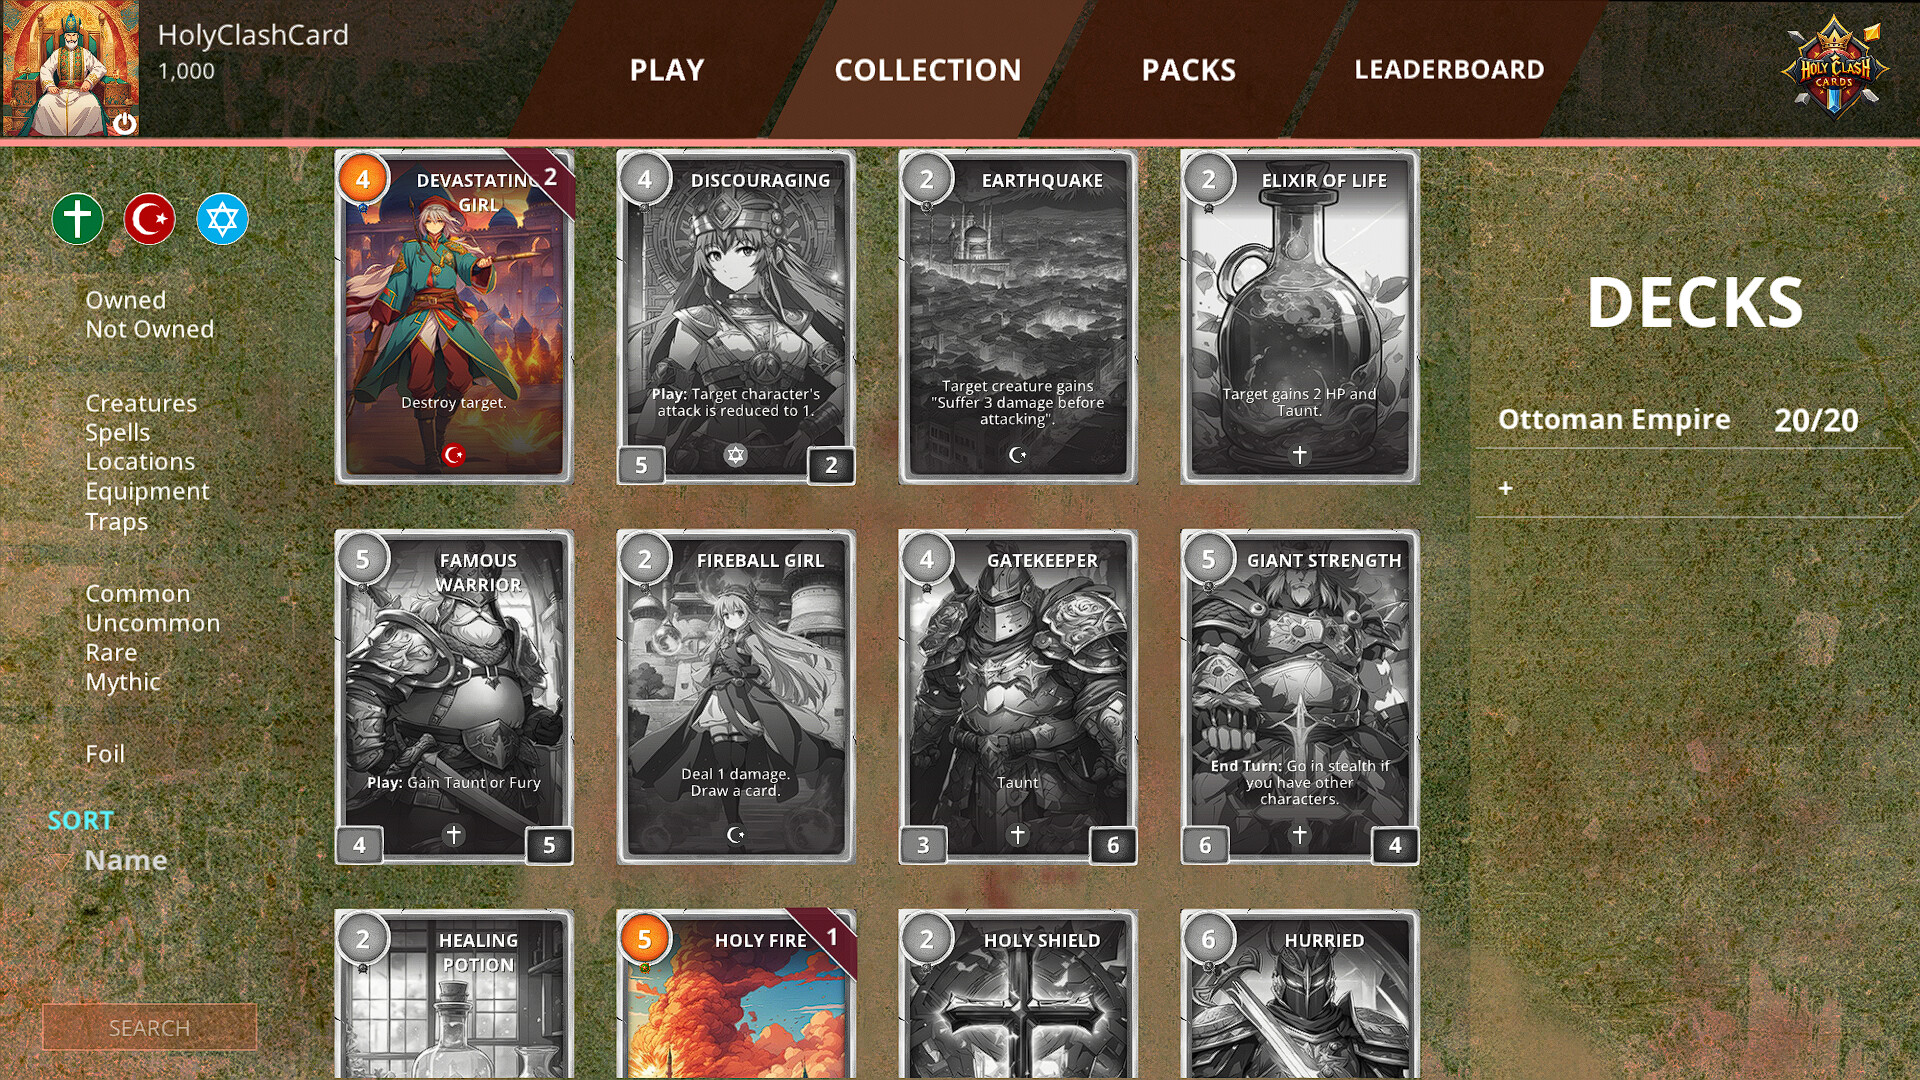 Holy Clash Cards - Expansion Pack Featured Screenshot #1